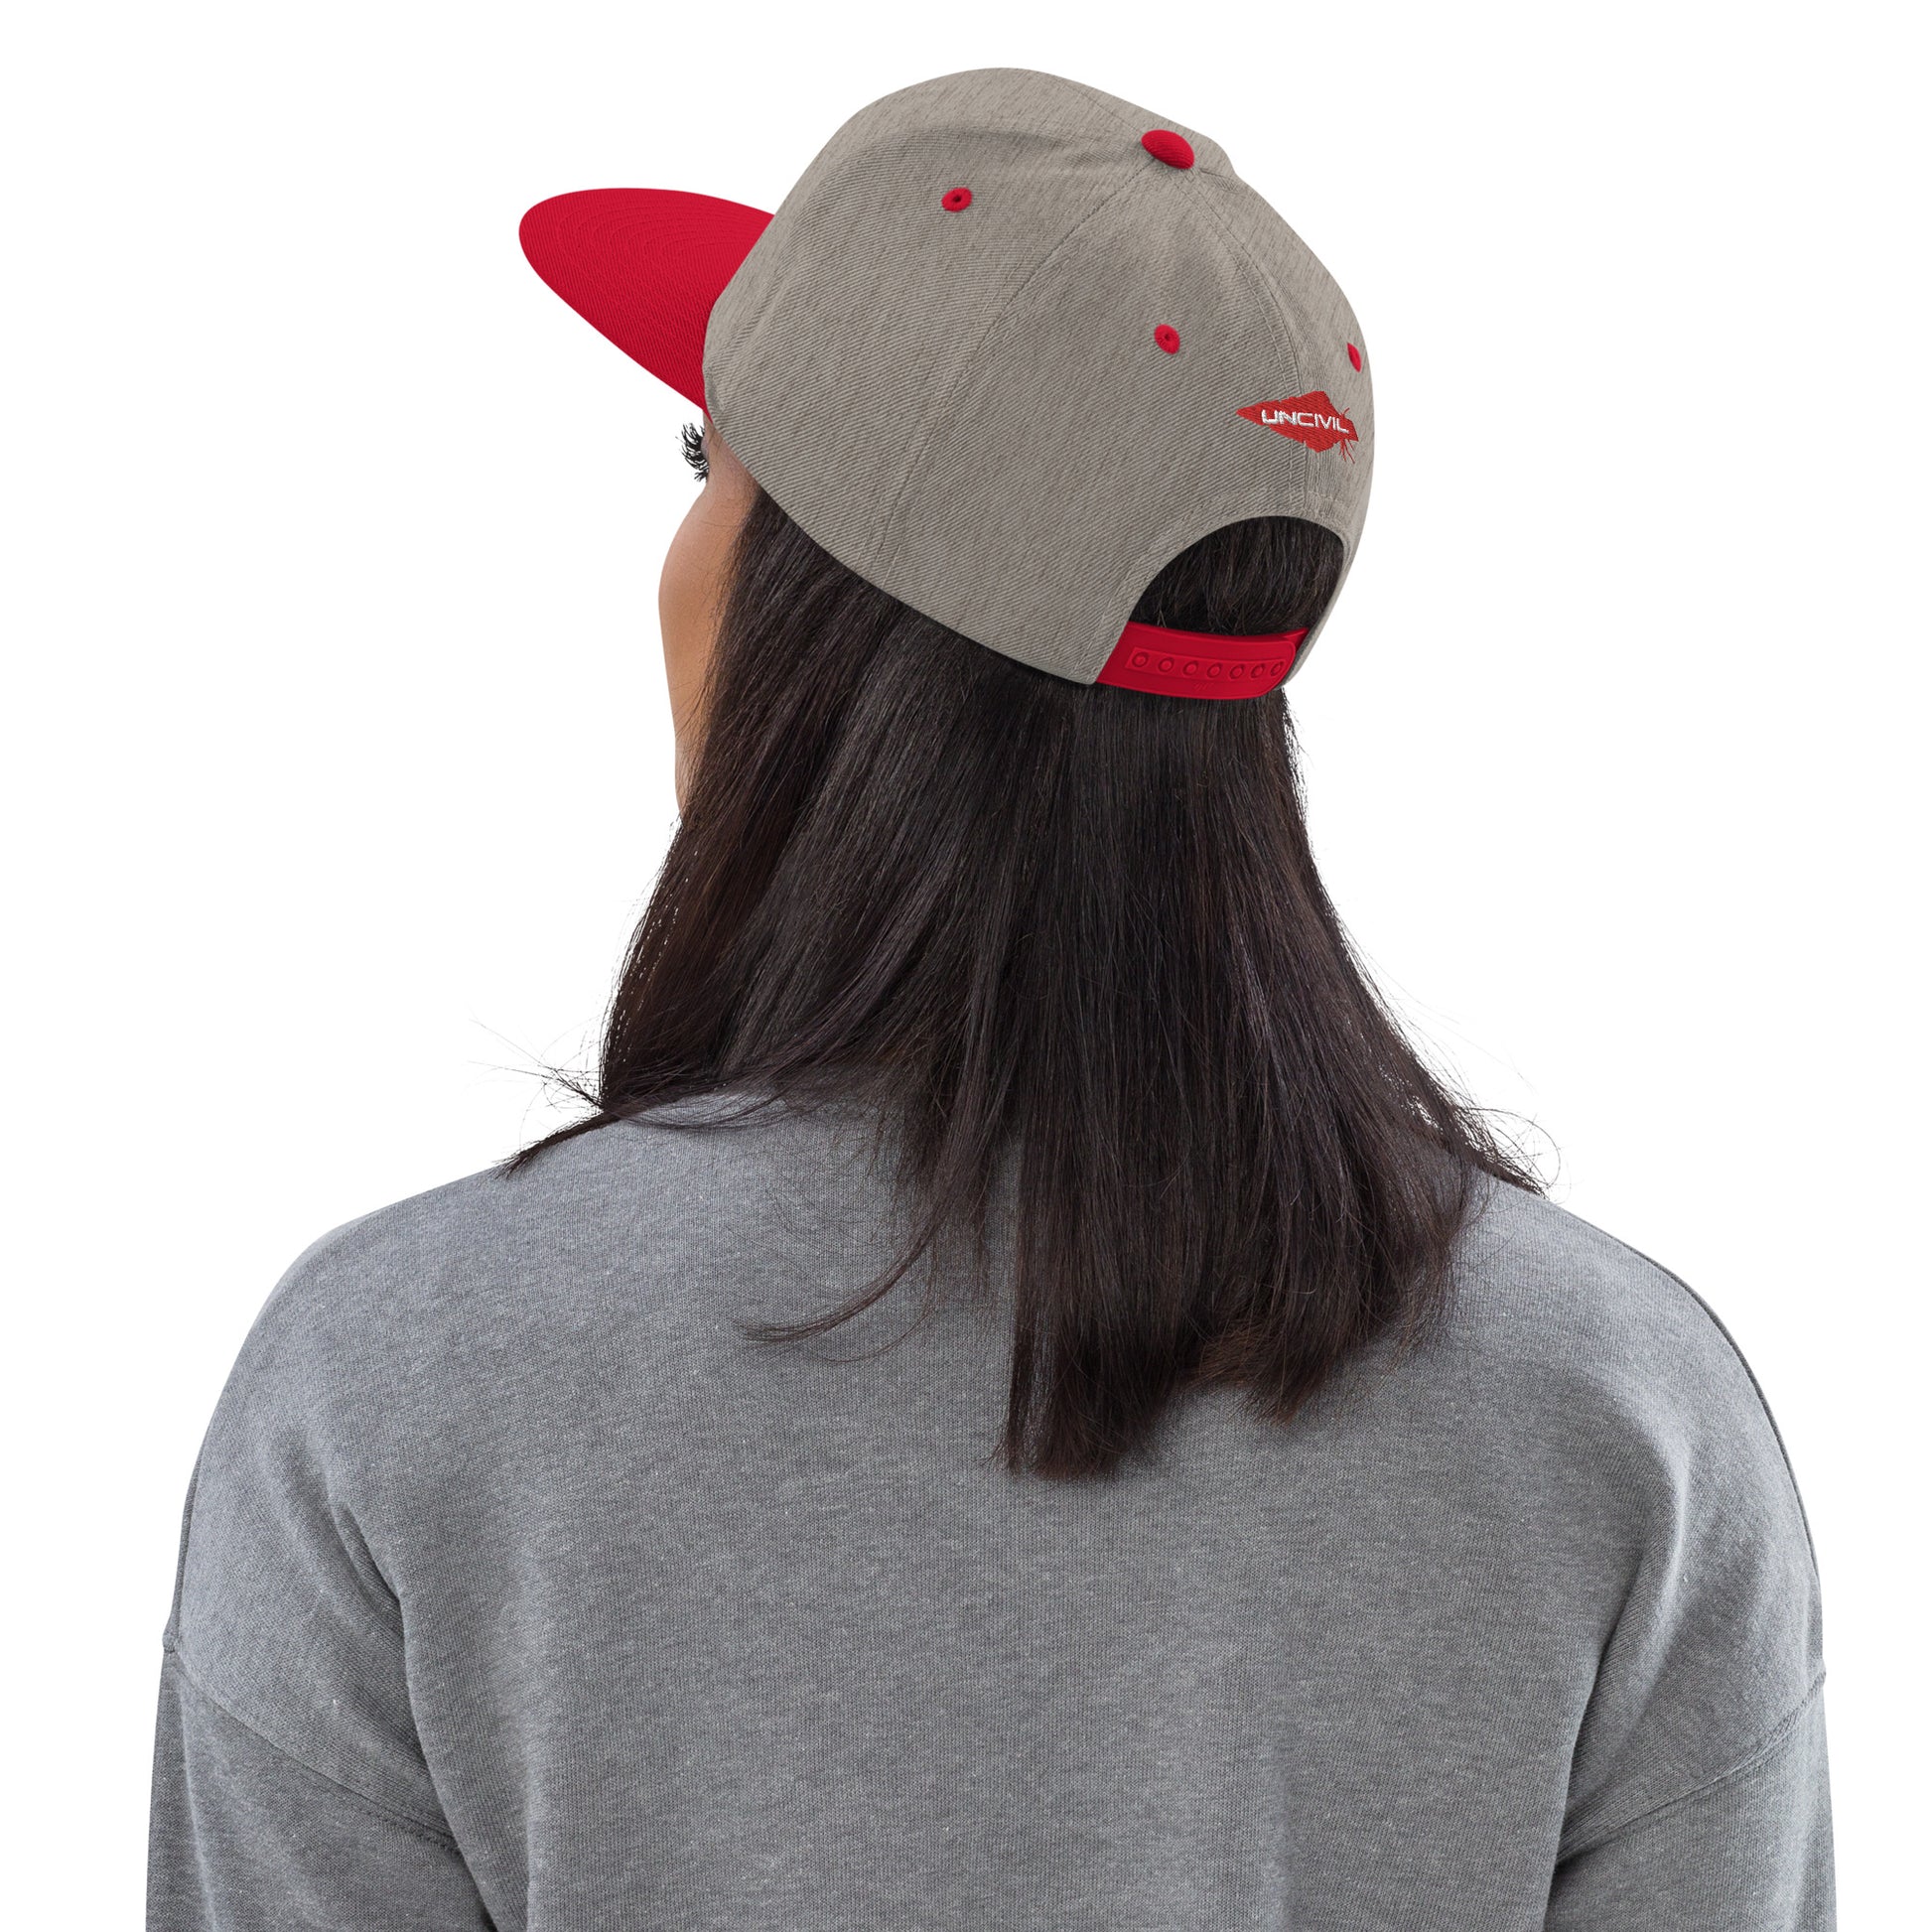 Heather Grey and Red Keys to the City, Halligan Bar classic snapback hat for firefighters